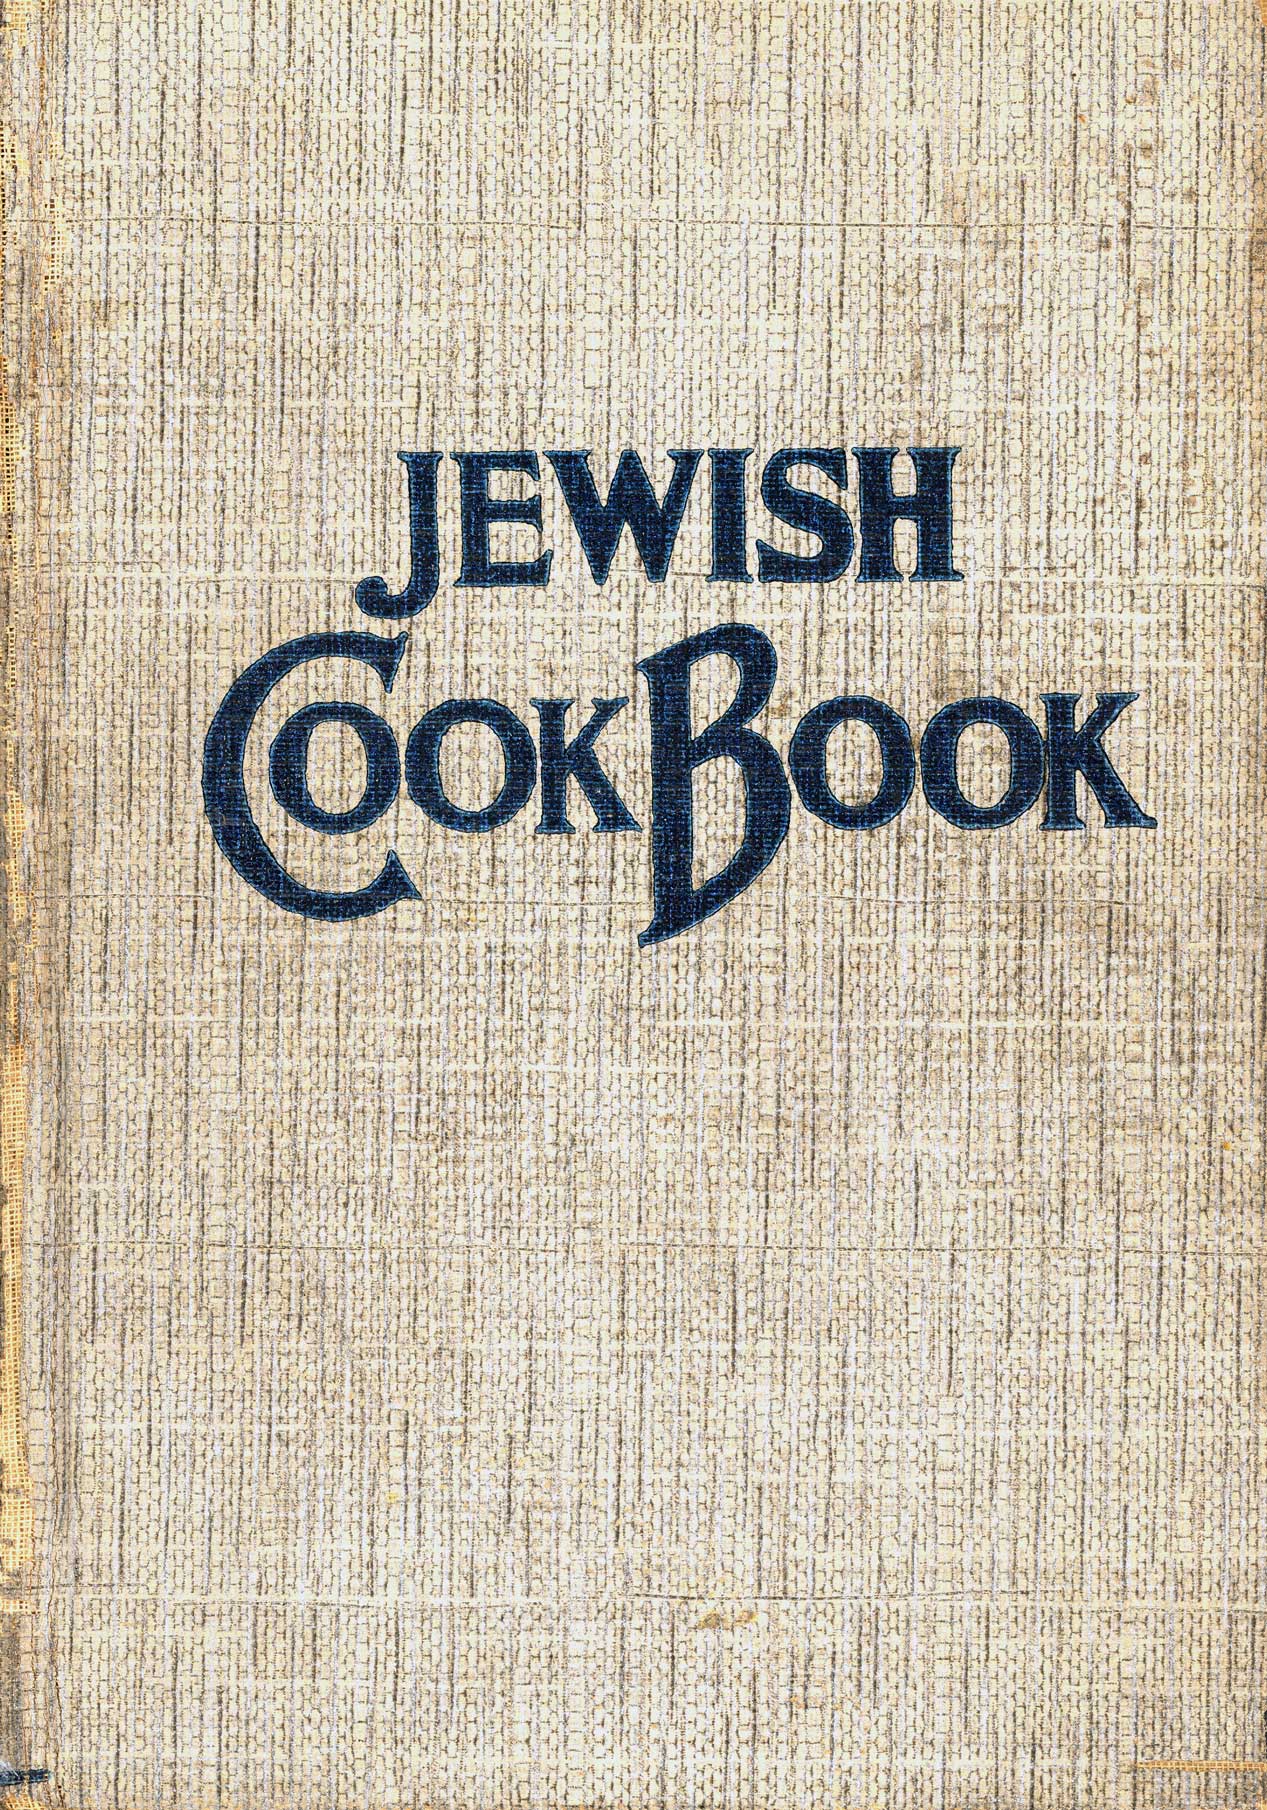 The international Jewish cook book : 1600 recipes according to the Jewish dietary laws with the rules for kashering : the favorite recipes of America, Austria, Germany, Russia, France, Poland, Roumania, etc., etc.